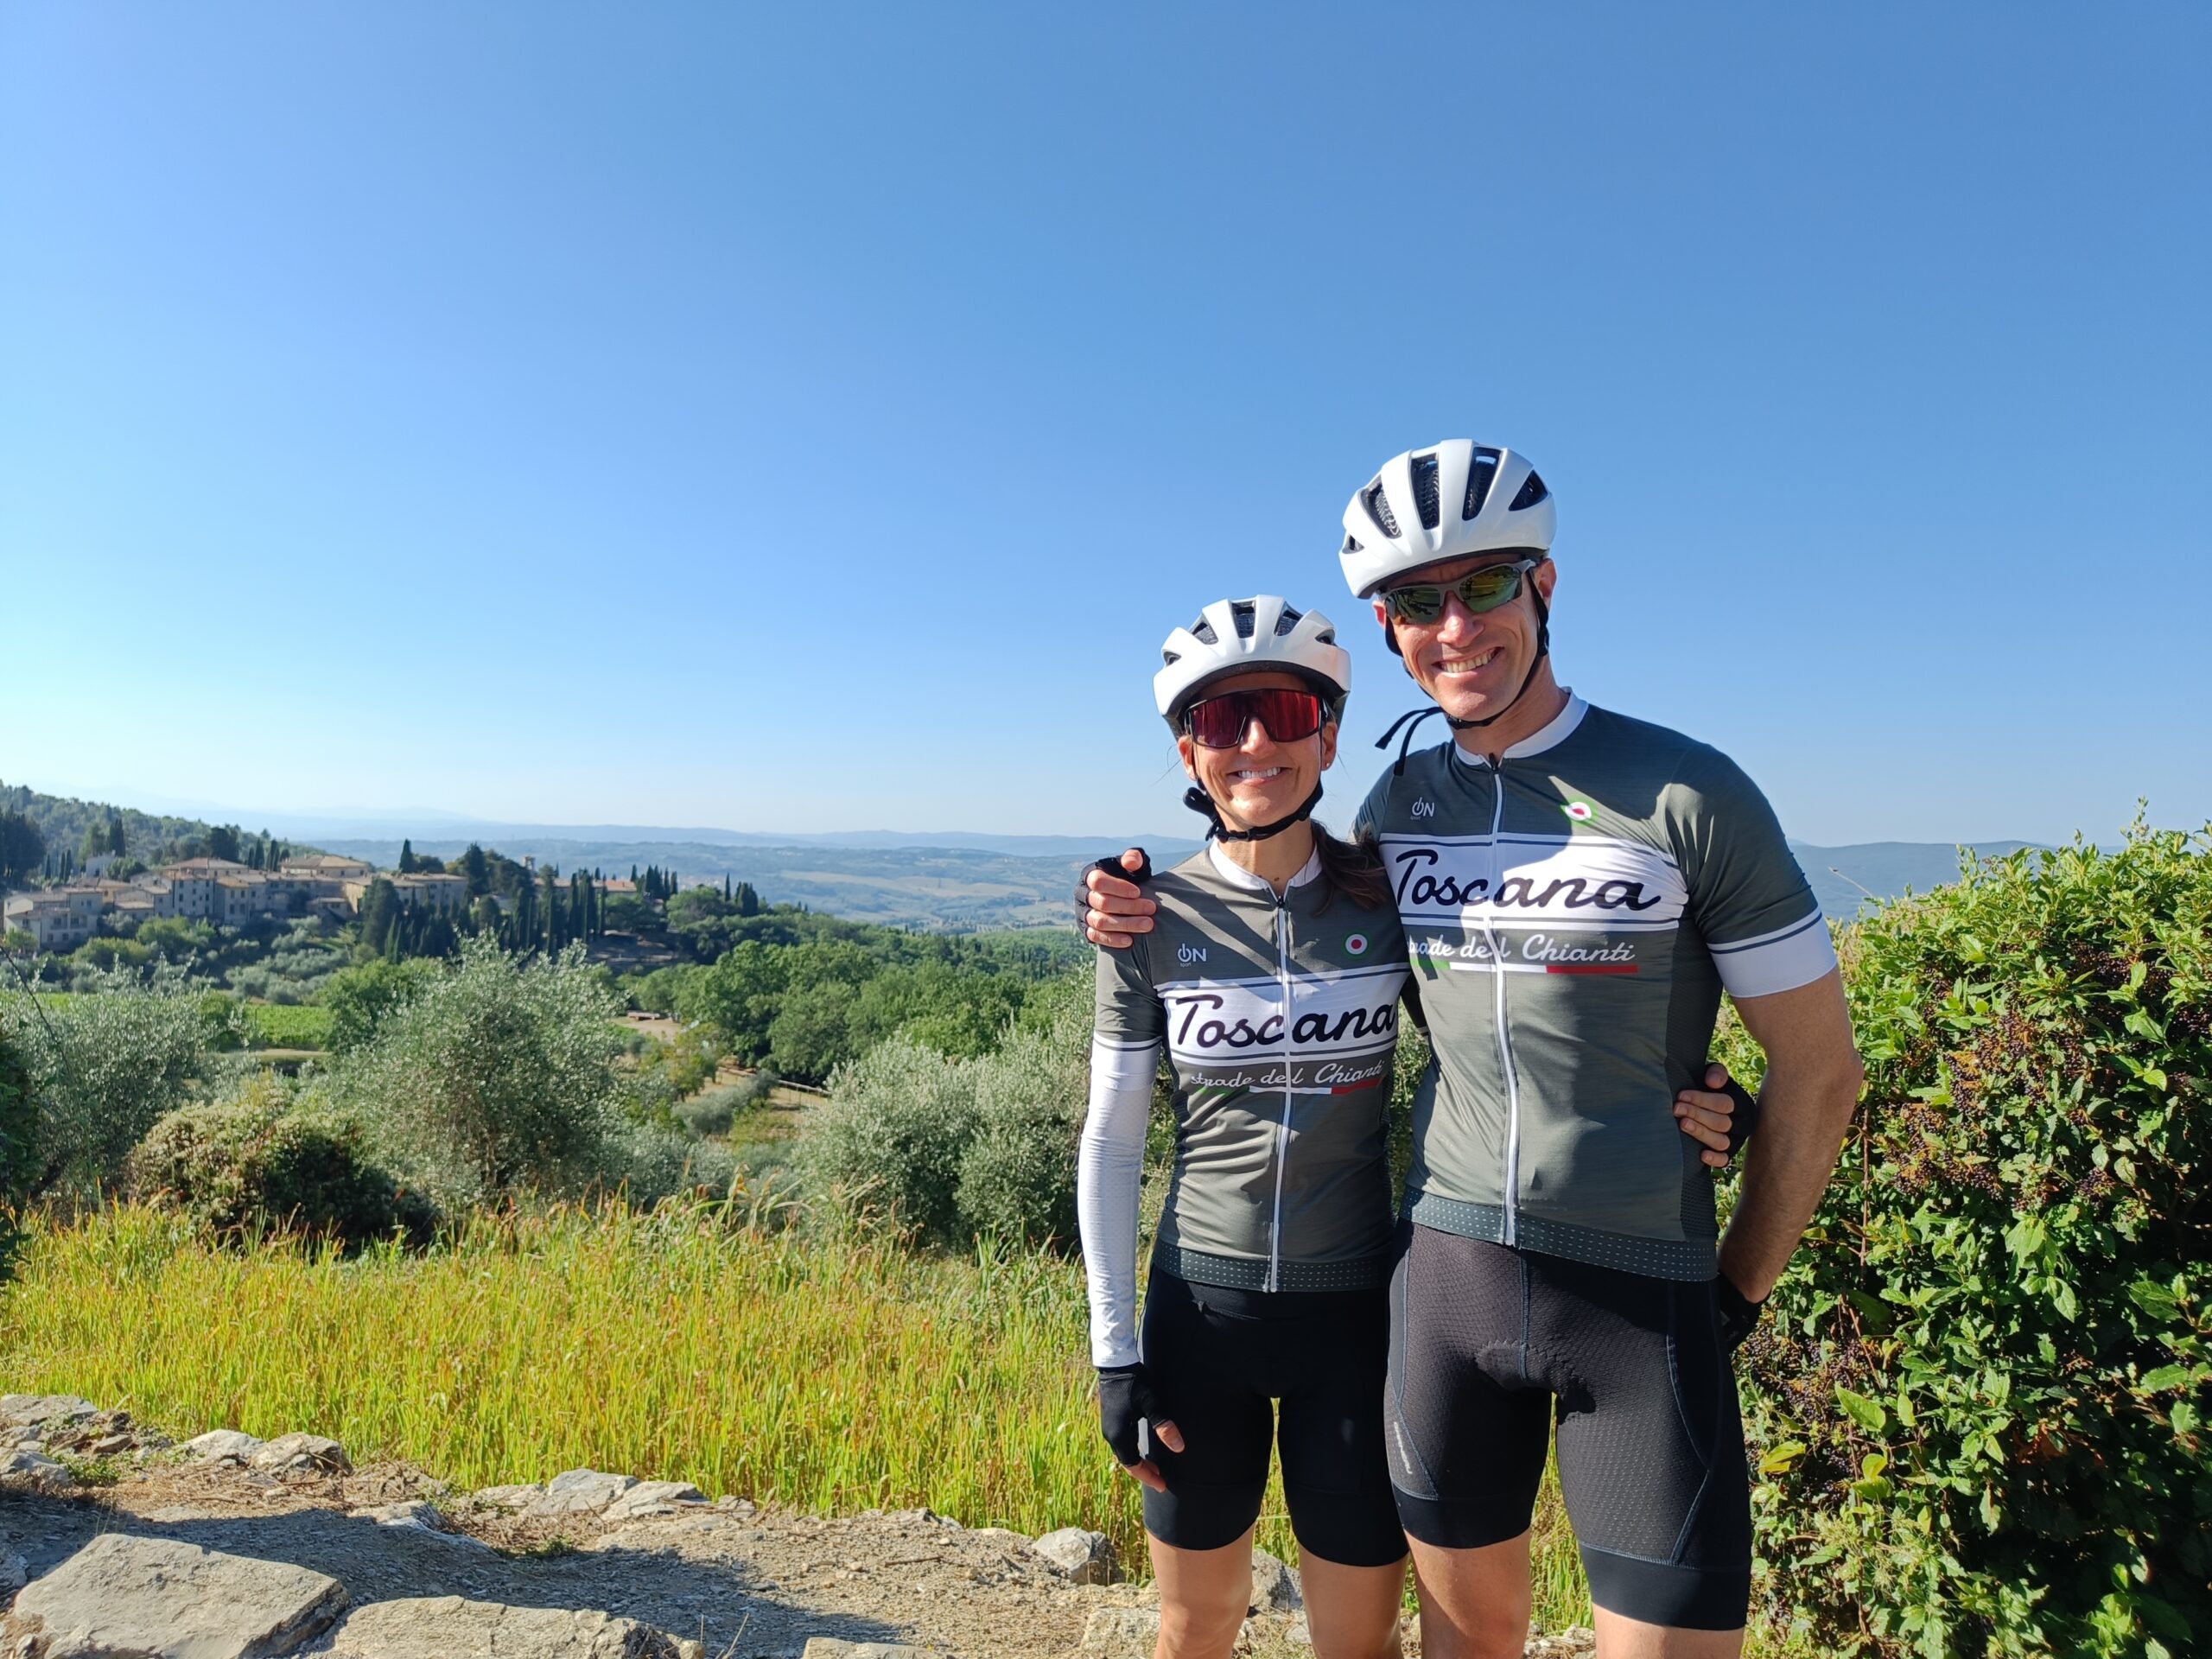 A cyclist couple wearing Toscana jerseys in front of a landscape